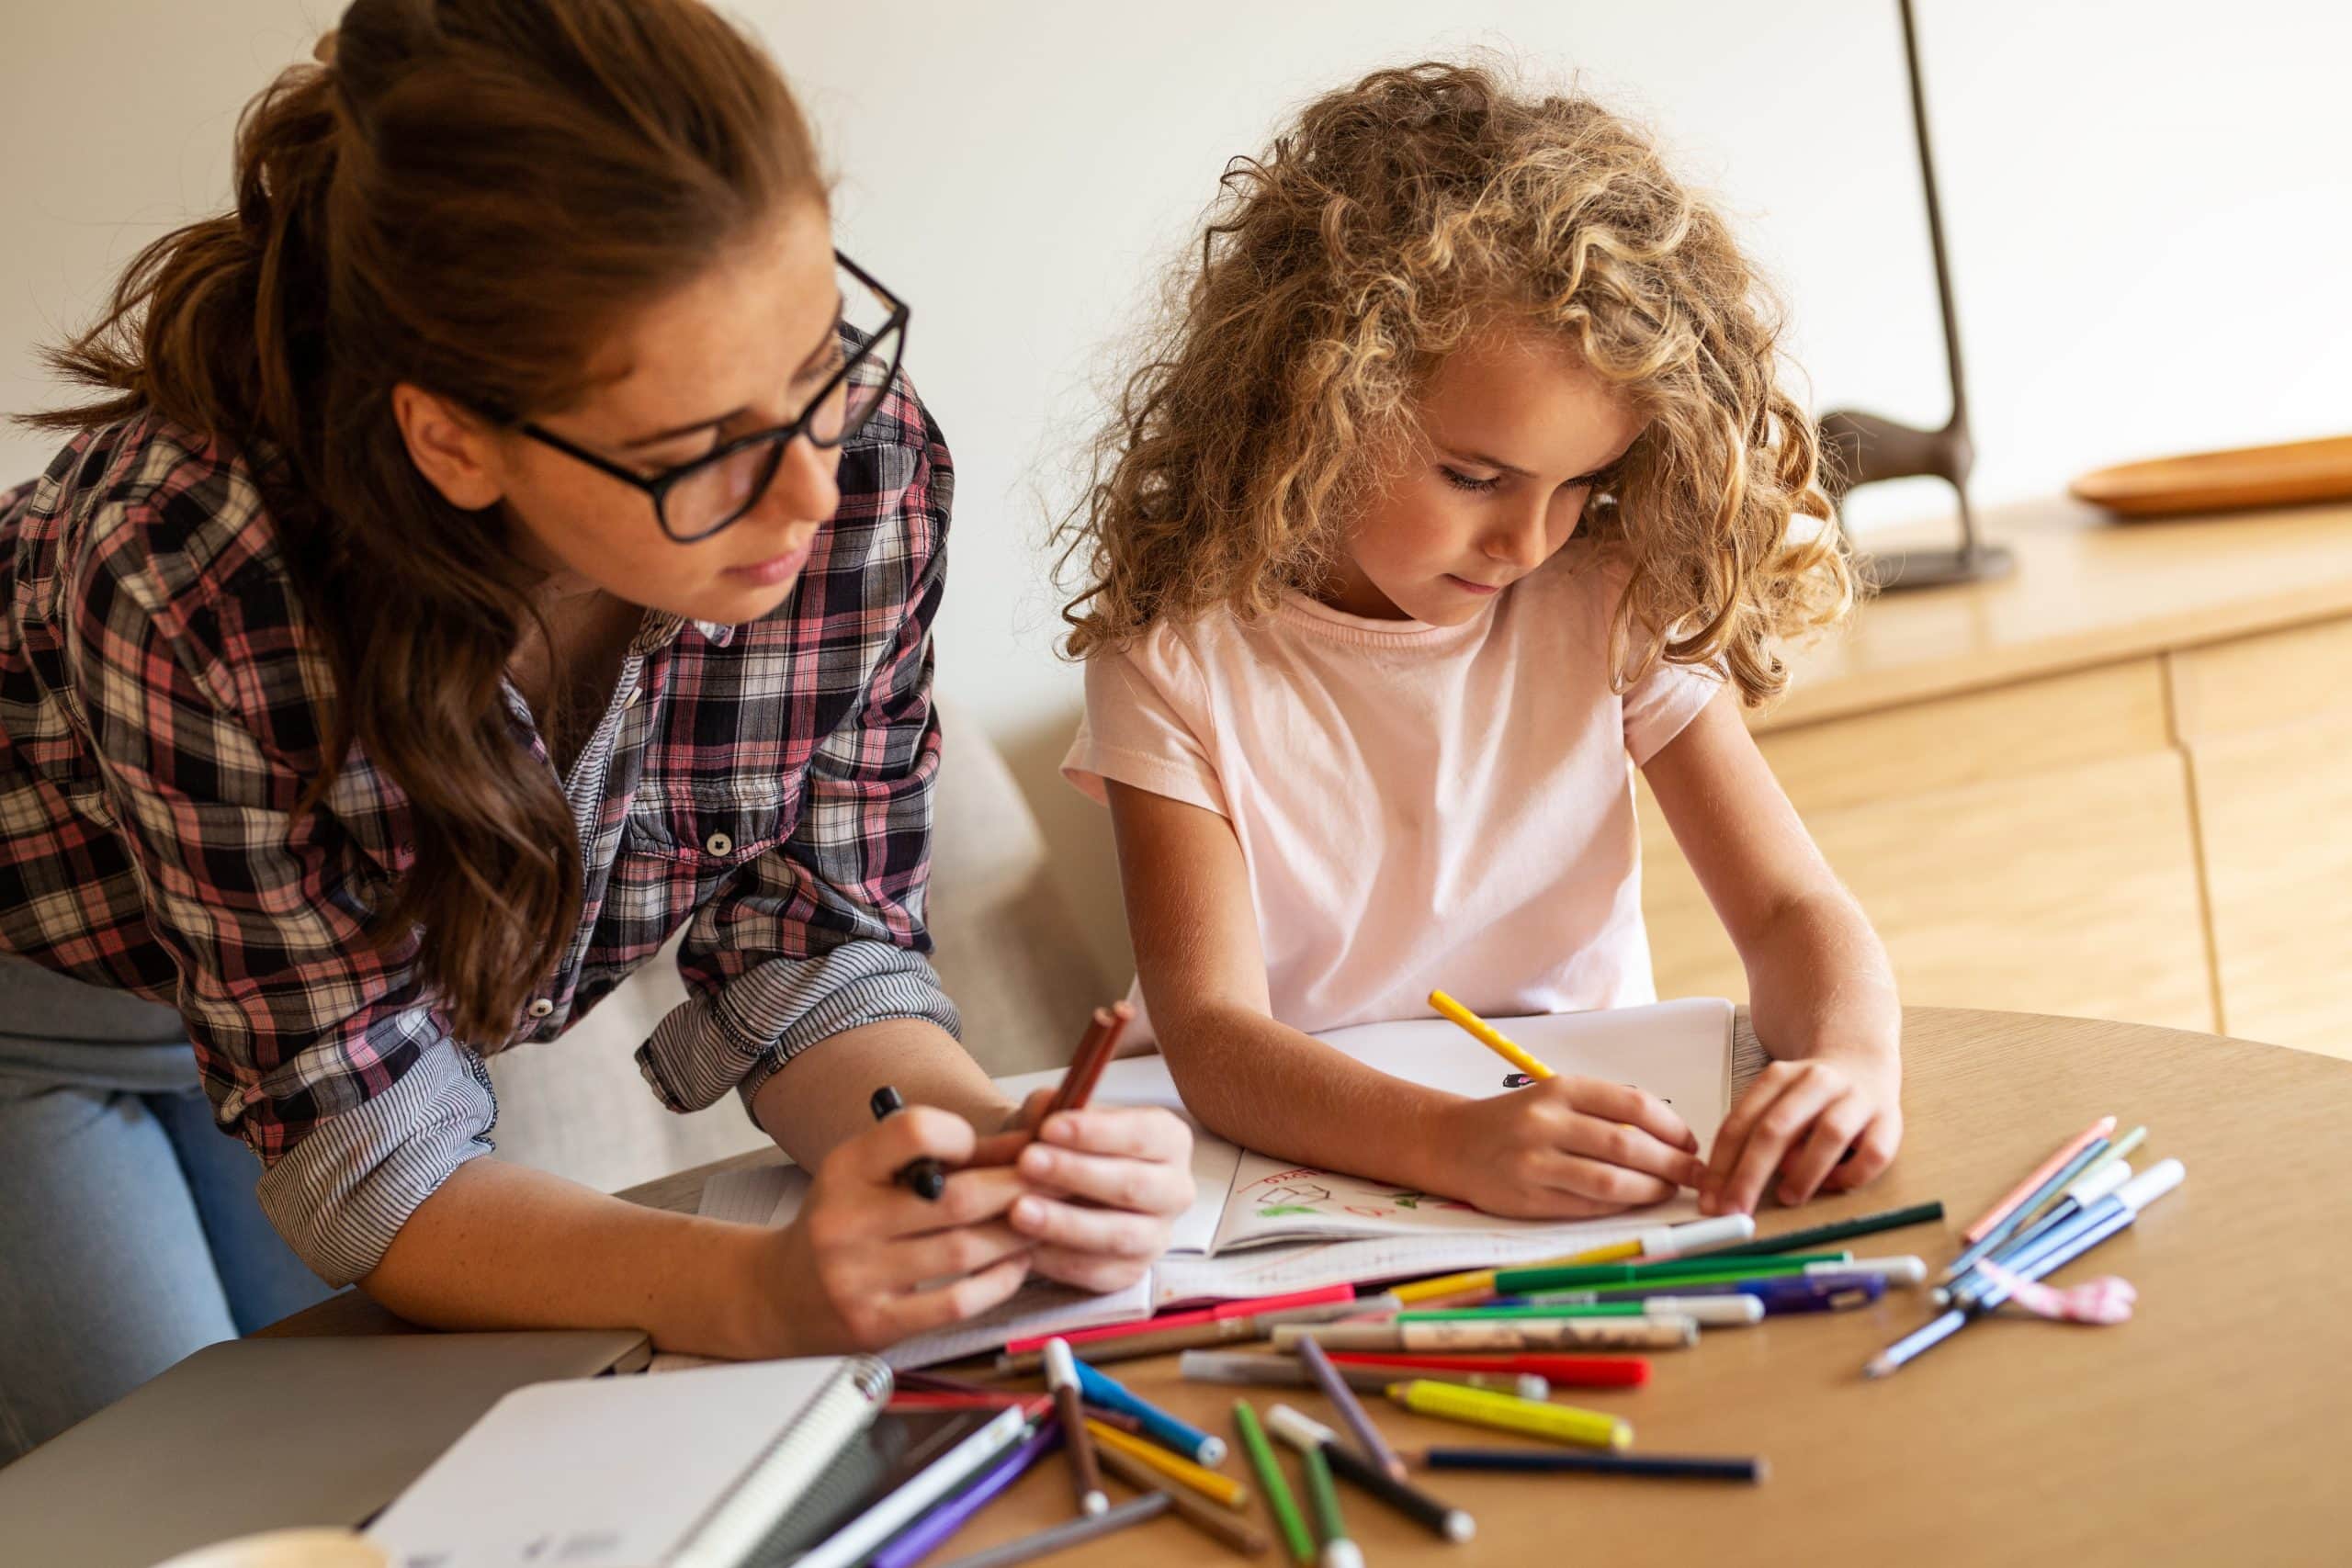 COVID-19 – Back to school and school holidays already. Accompanying image: mother and daughter drawing together at home